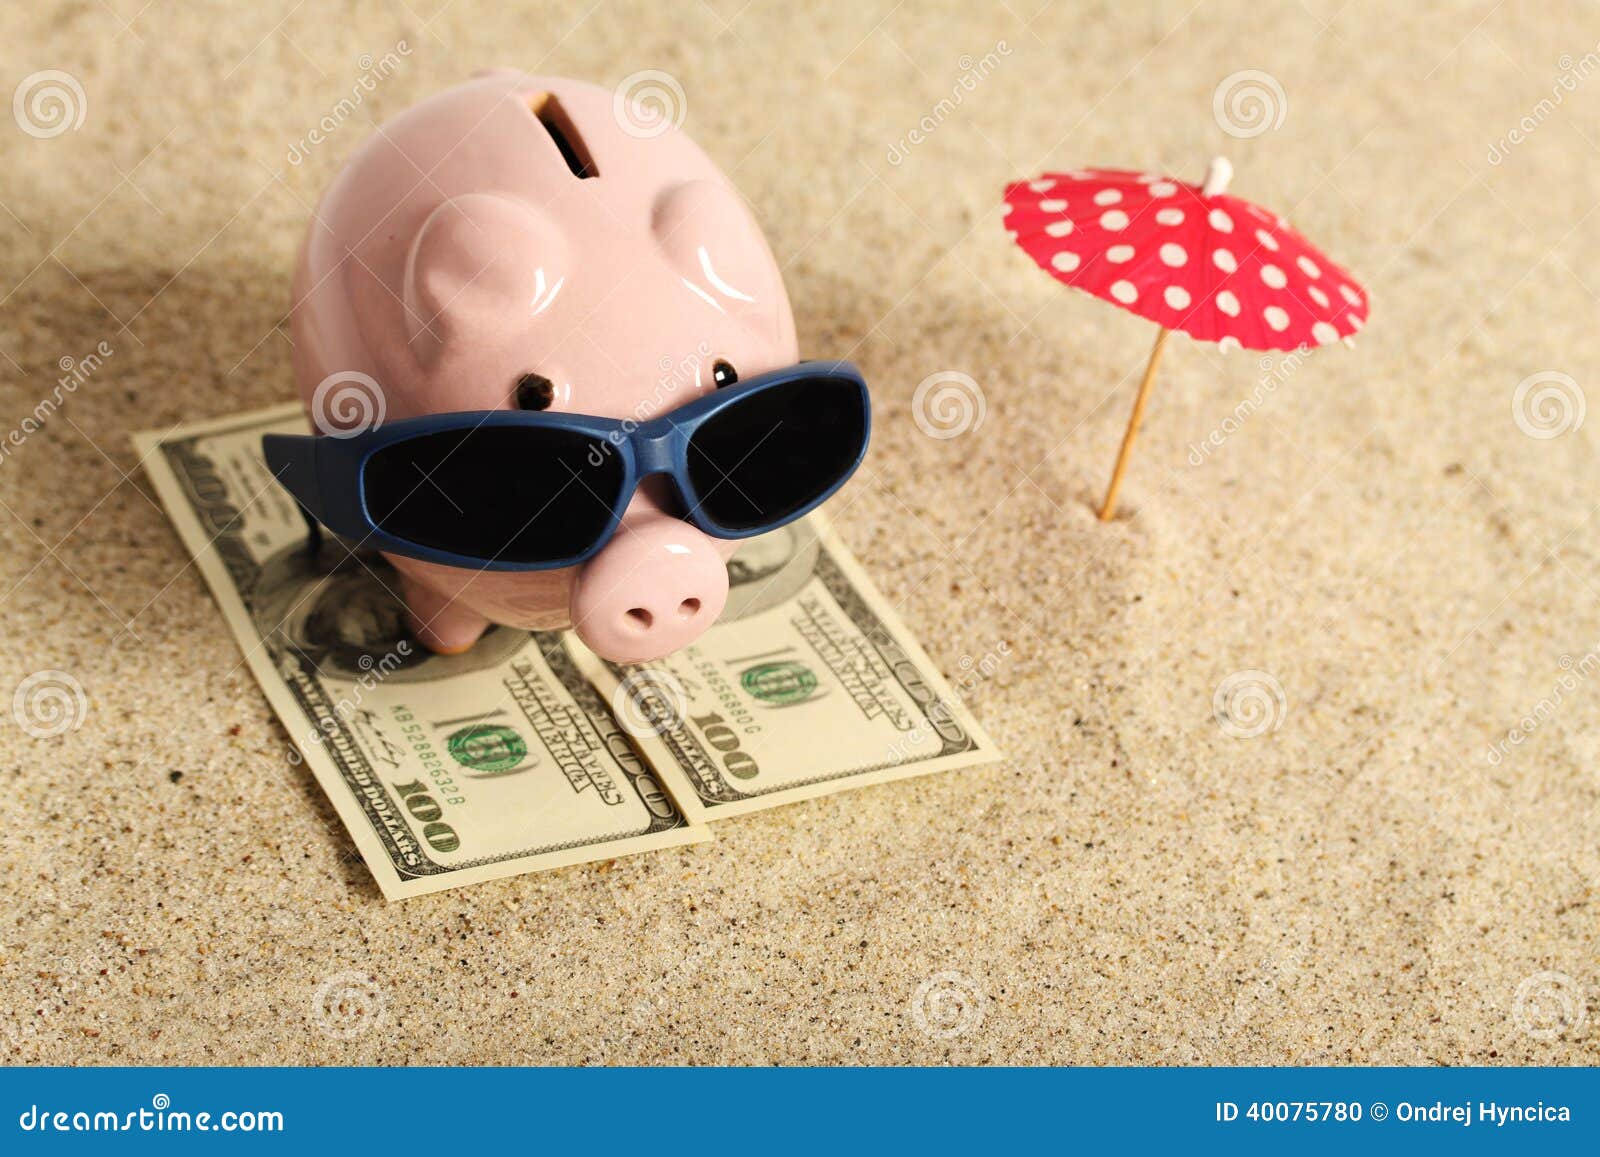 summer piggy bank standing on towel from greenback hundred dollars with sunglasses on the beach and red parasol